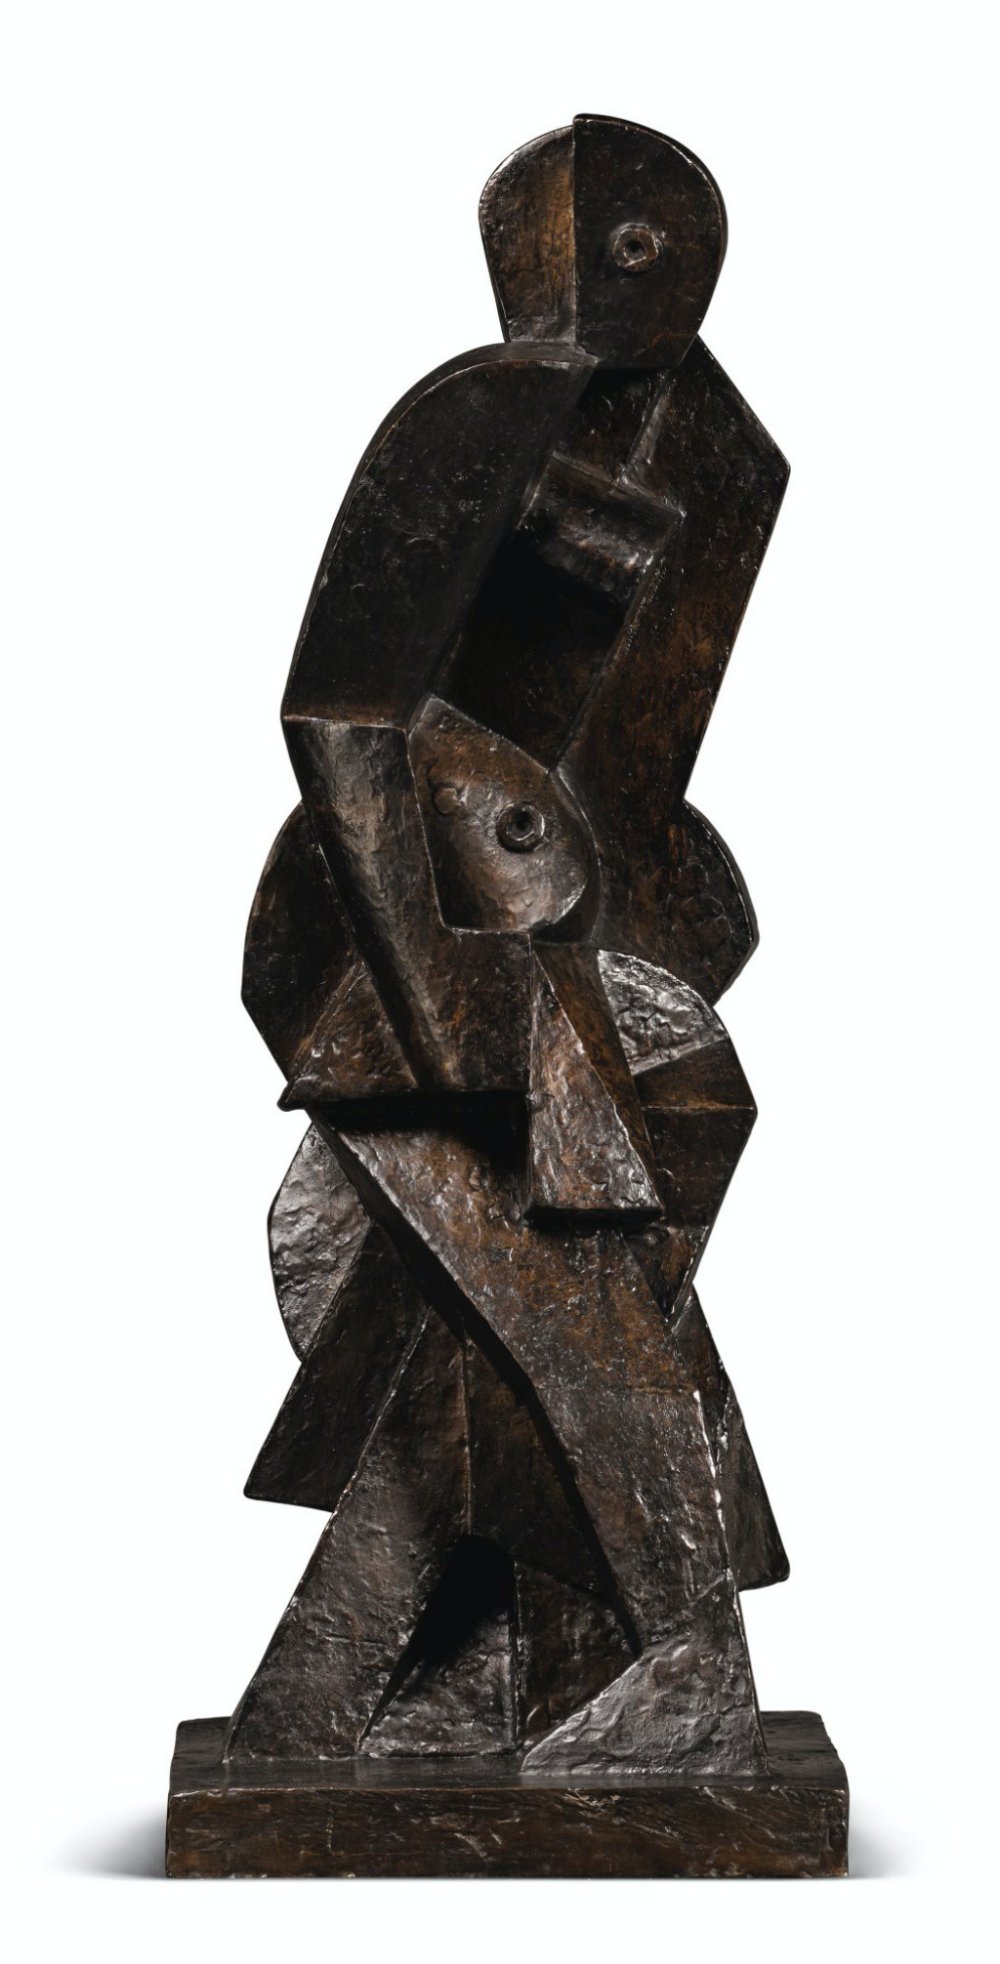 Jacques Lipchitz, Baigneuse, conceived in 1917